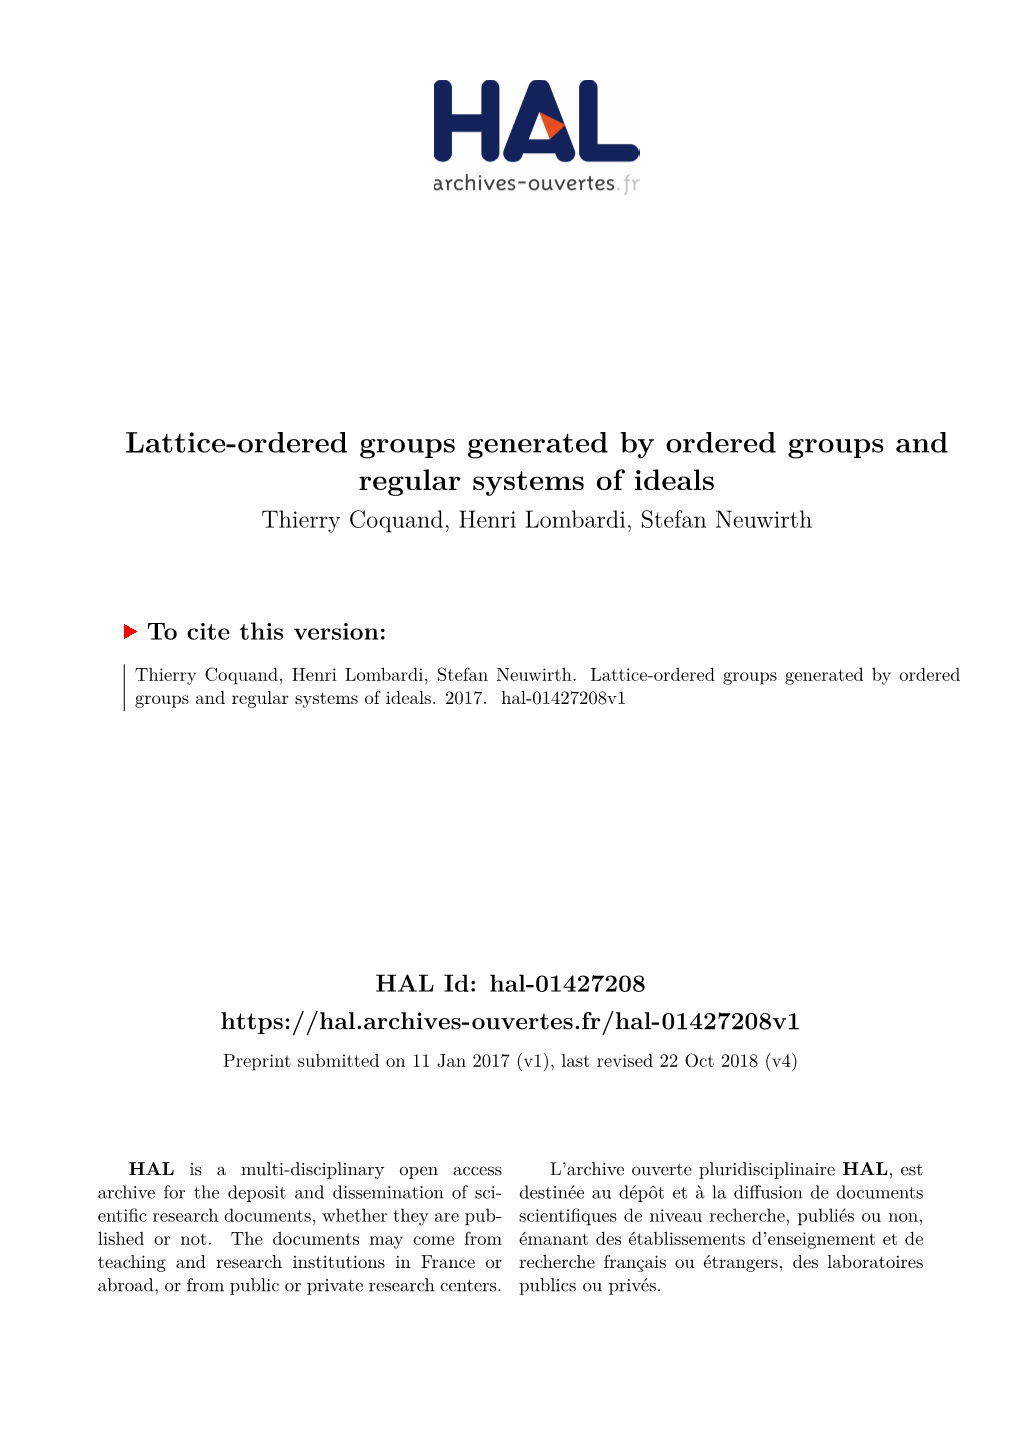 Lattice-Ordered Groups Generated by Ordered Groups and Regular Systems of Ideals Thierry Coquand, Henri Lombardi, Stefan Neuwirth